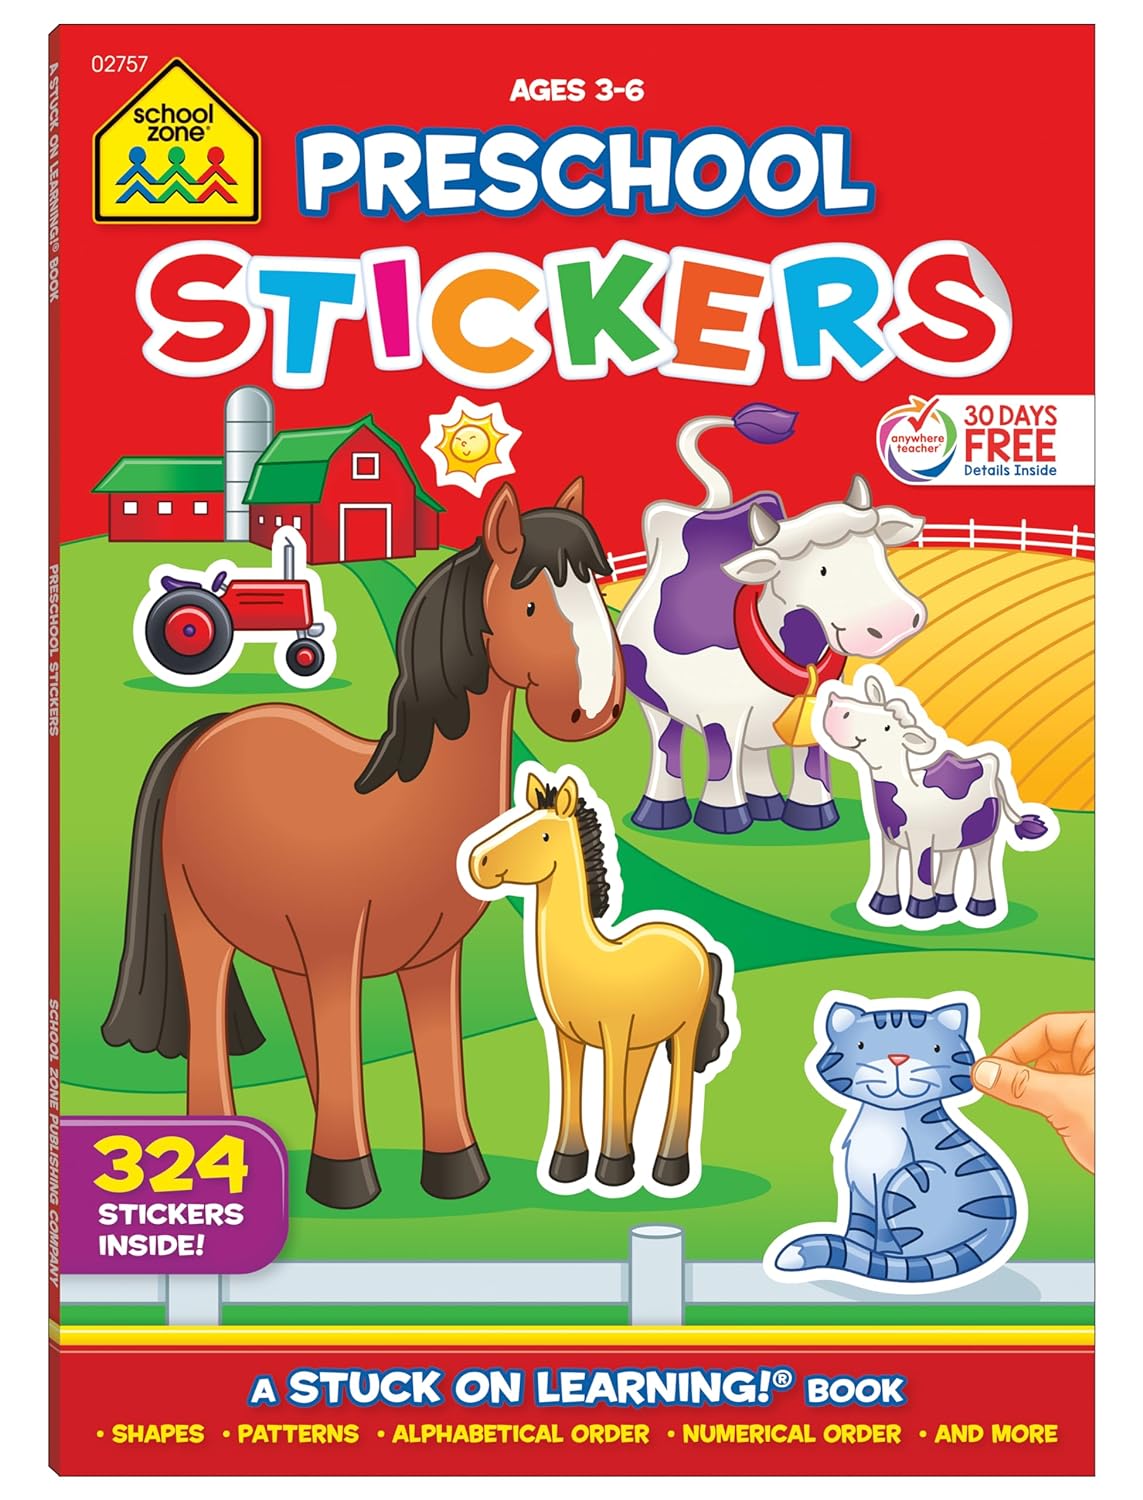 52-Page School Zone Kids' Preschool Stuck on Learning Activity Book w/ 324 Stickers $2 + Free Shipping w/ Prime